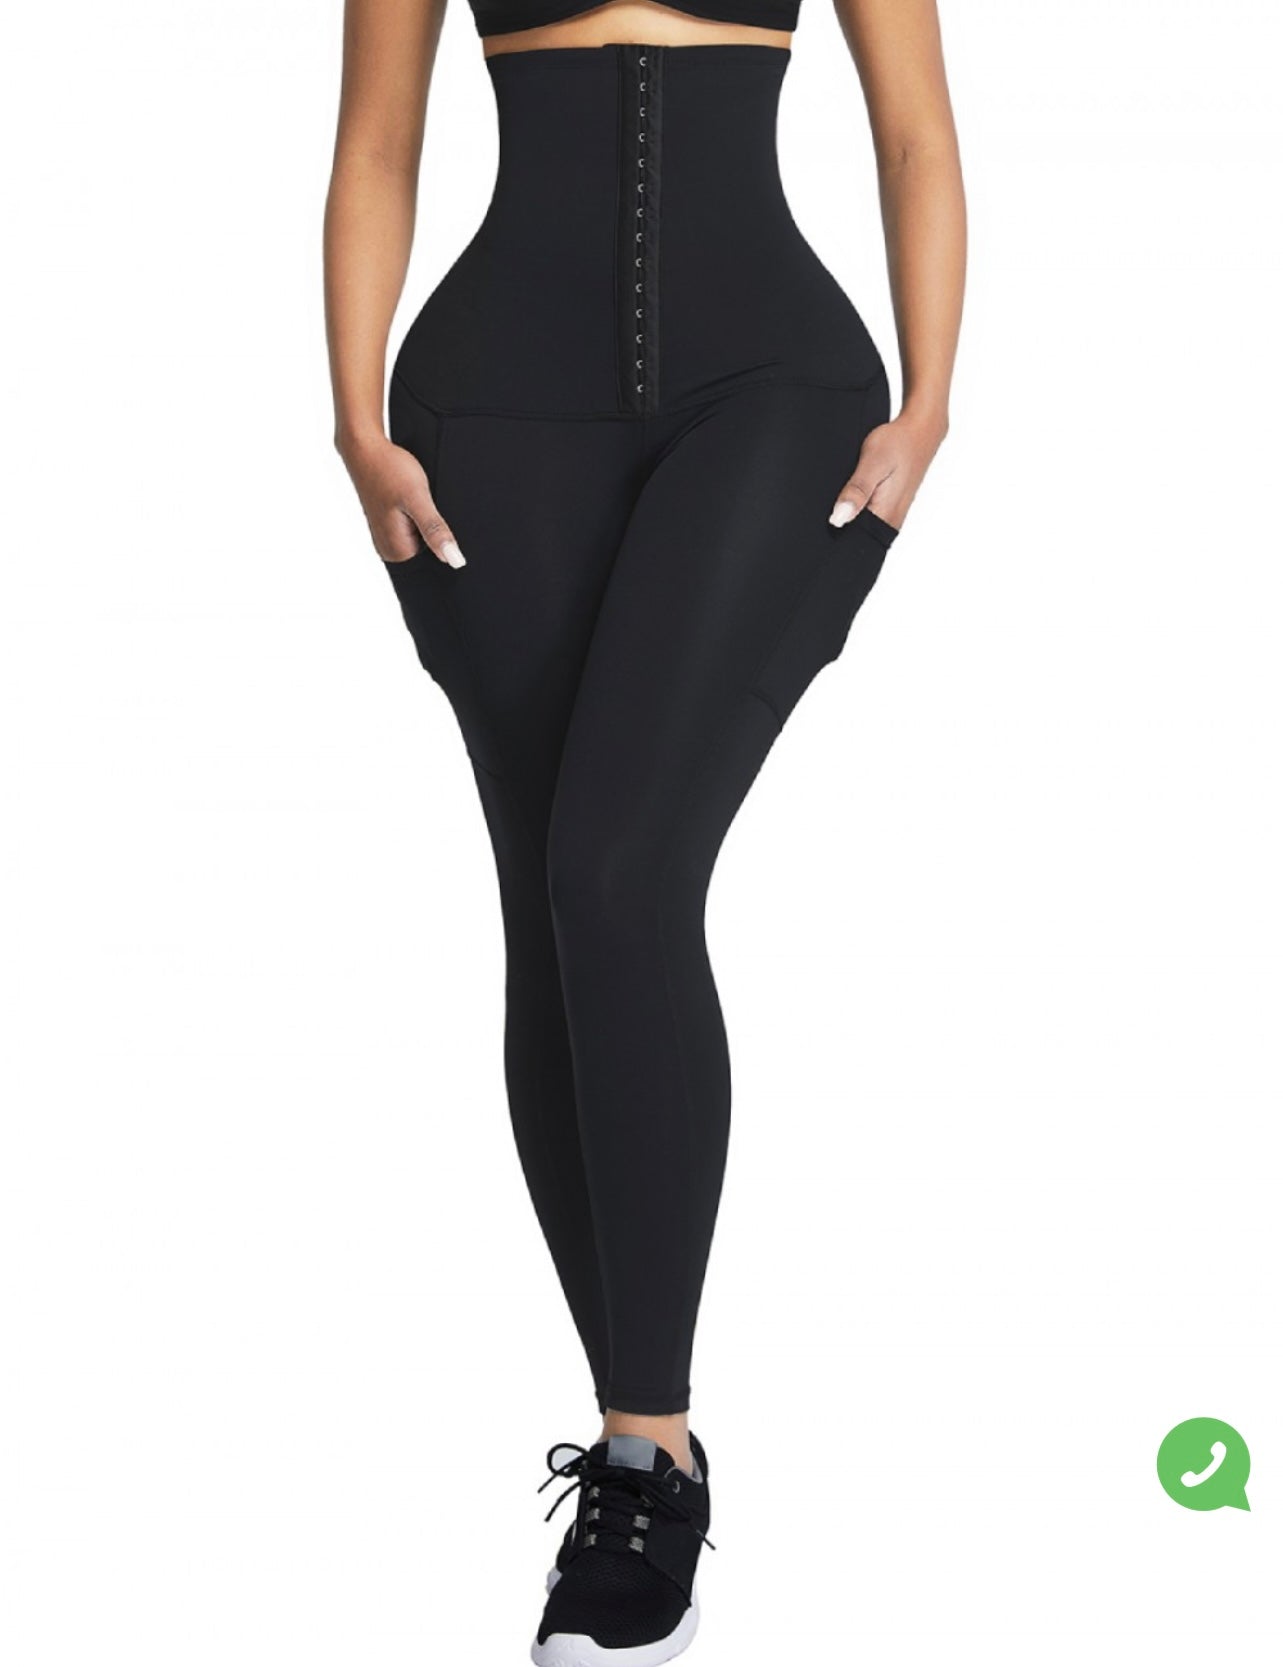 HIGH WAIST LEGGINGS WITH POCKET - WrapAndTuck